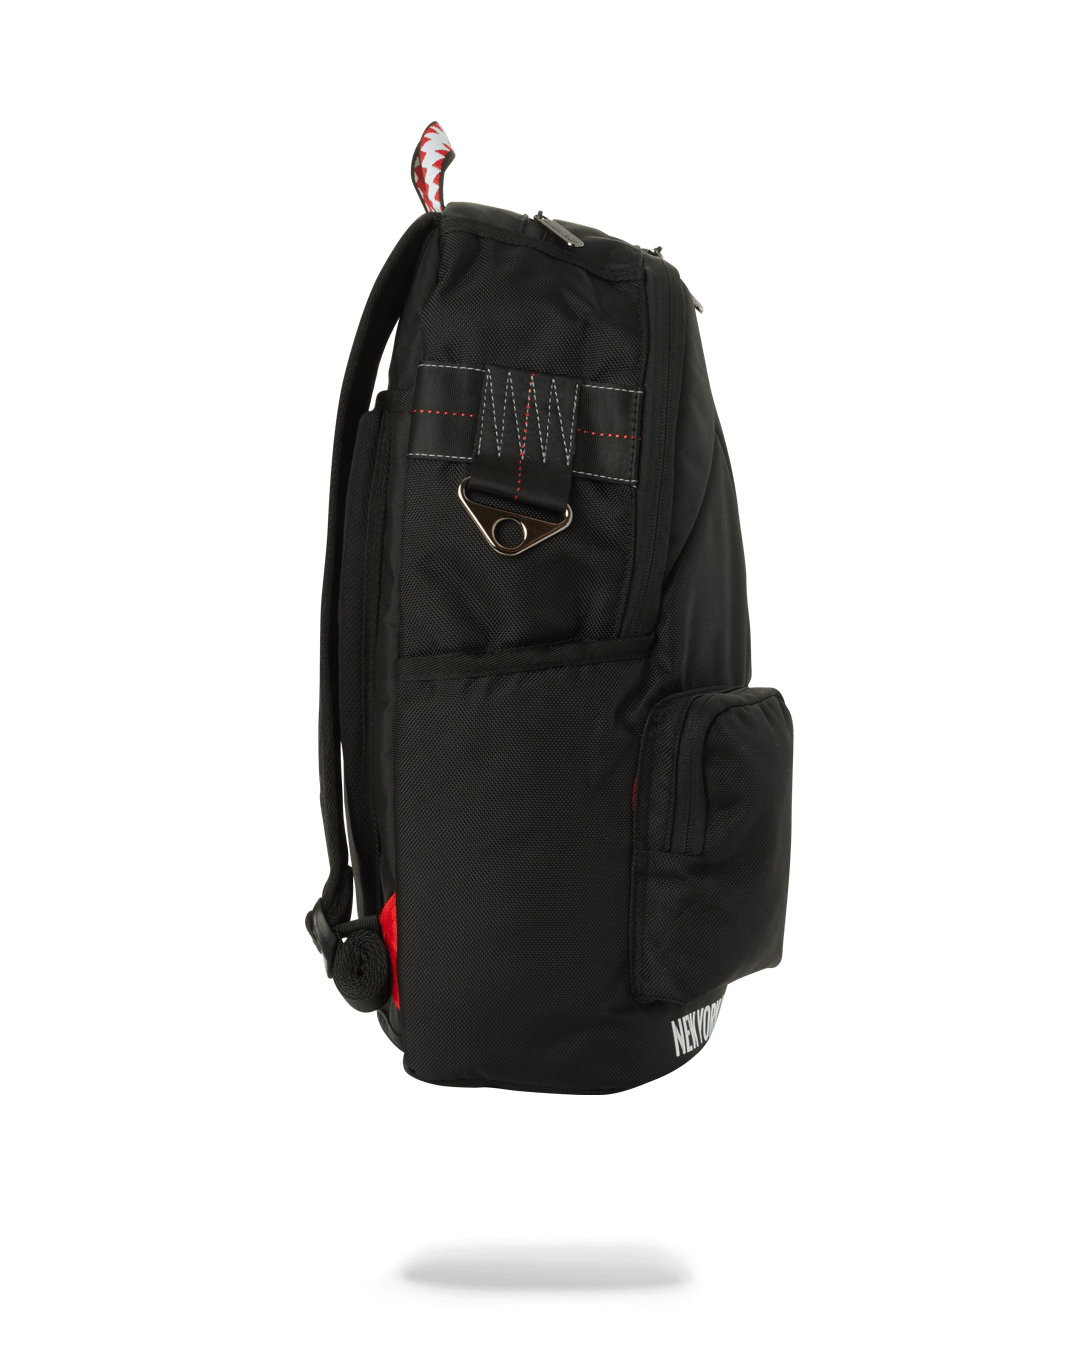 Cheap - Sale Sprayground Shadow Shark Backpack Discount authentic sale - At www.bagssaleusa.com/product-category/shoes/